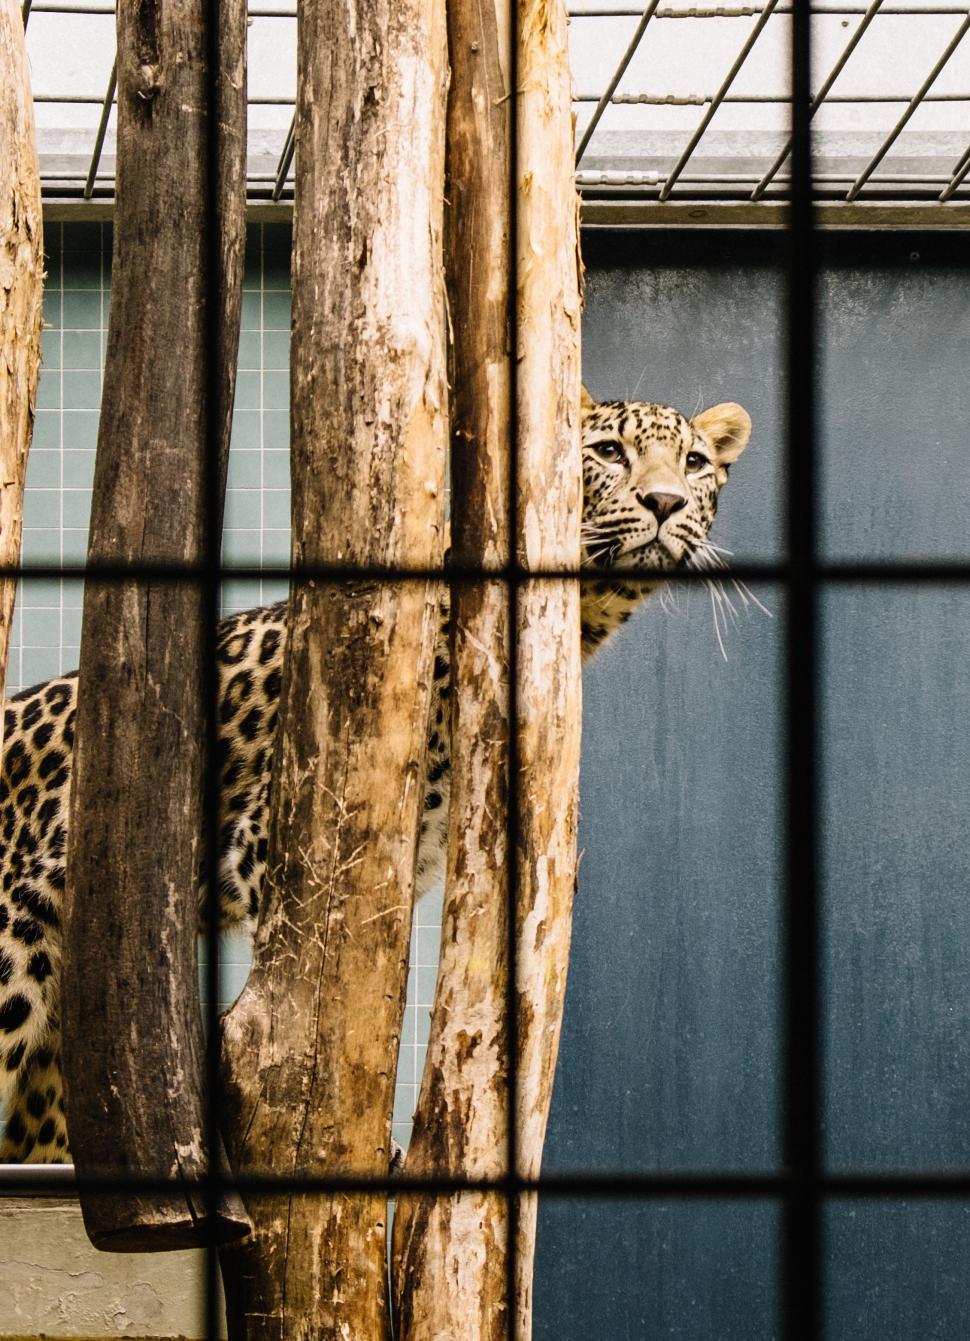 Free Image of Large Leopard Standing Next to Tree in Cage 